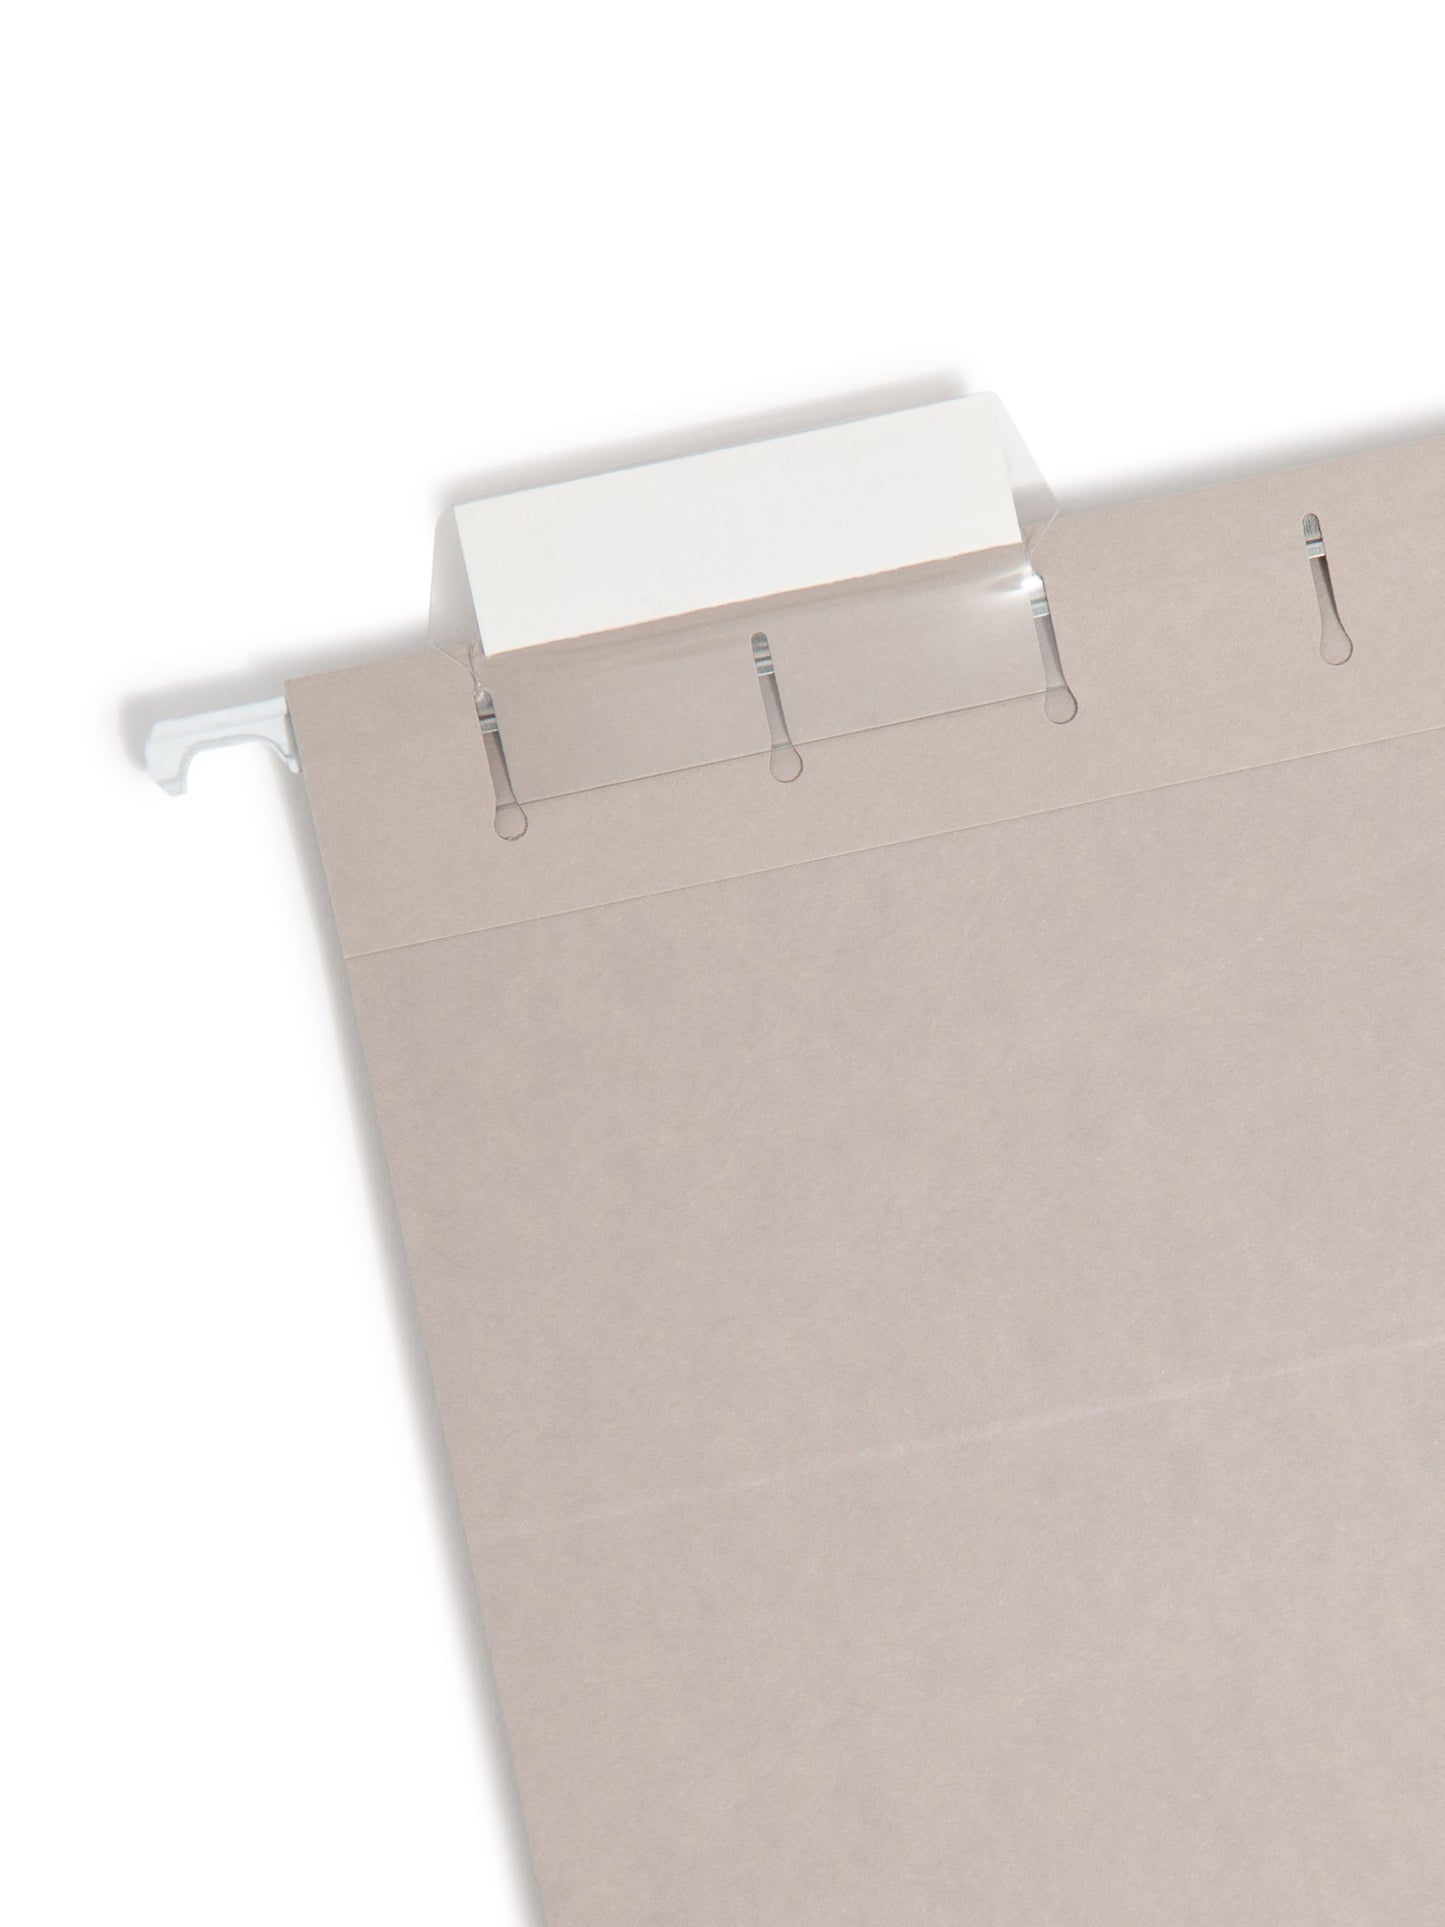 Standard Hanging File Folders with 1/5-Cut Tabs, Gray Color, Letter Size, Set of 25, 086486640633